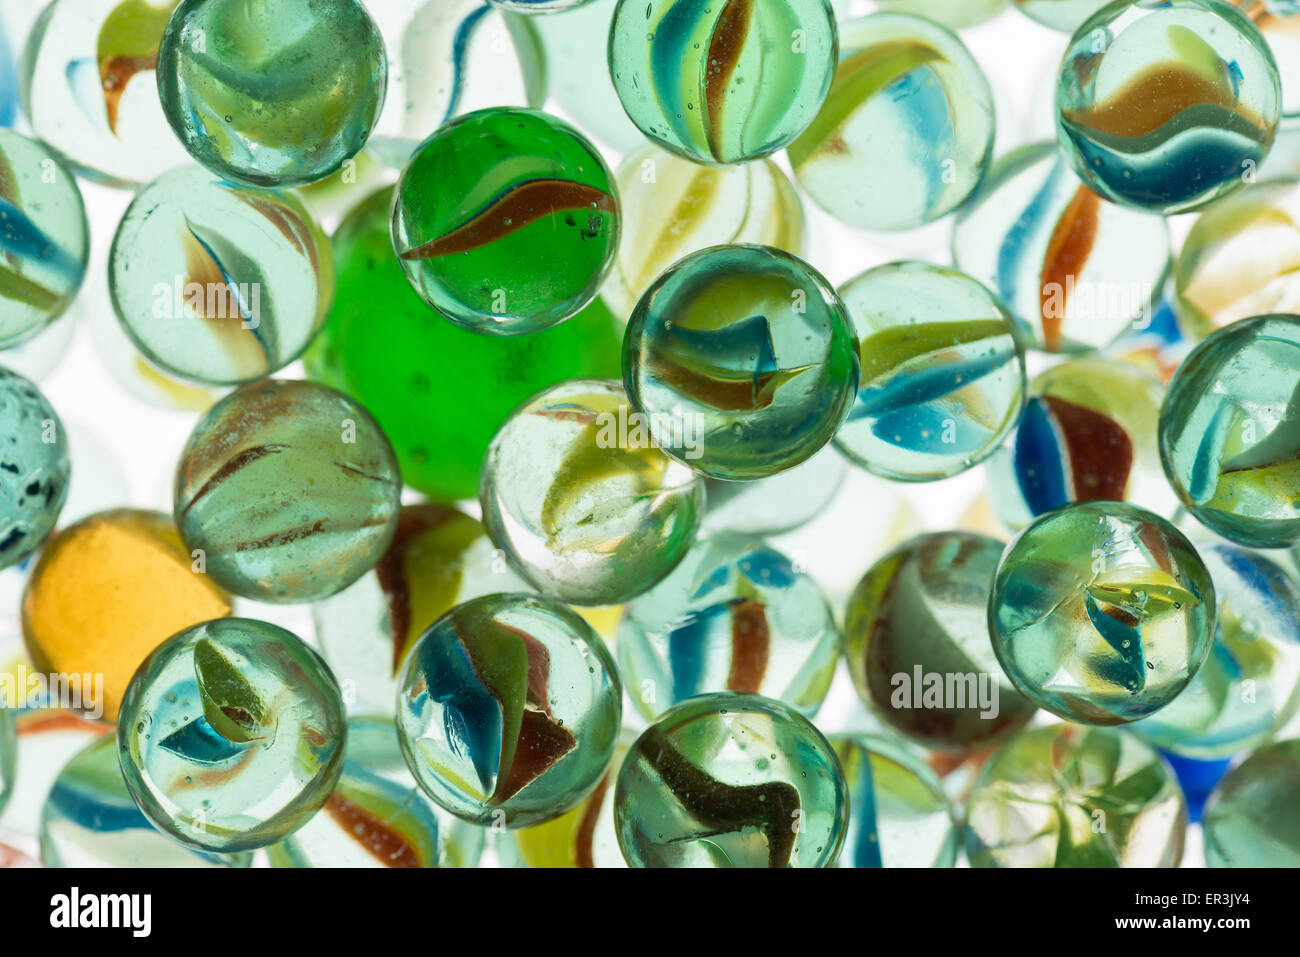 collection of old glass transparent marbles with unique swirls of colored glass trapped inside Stock Photo